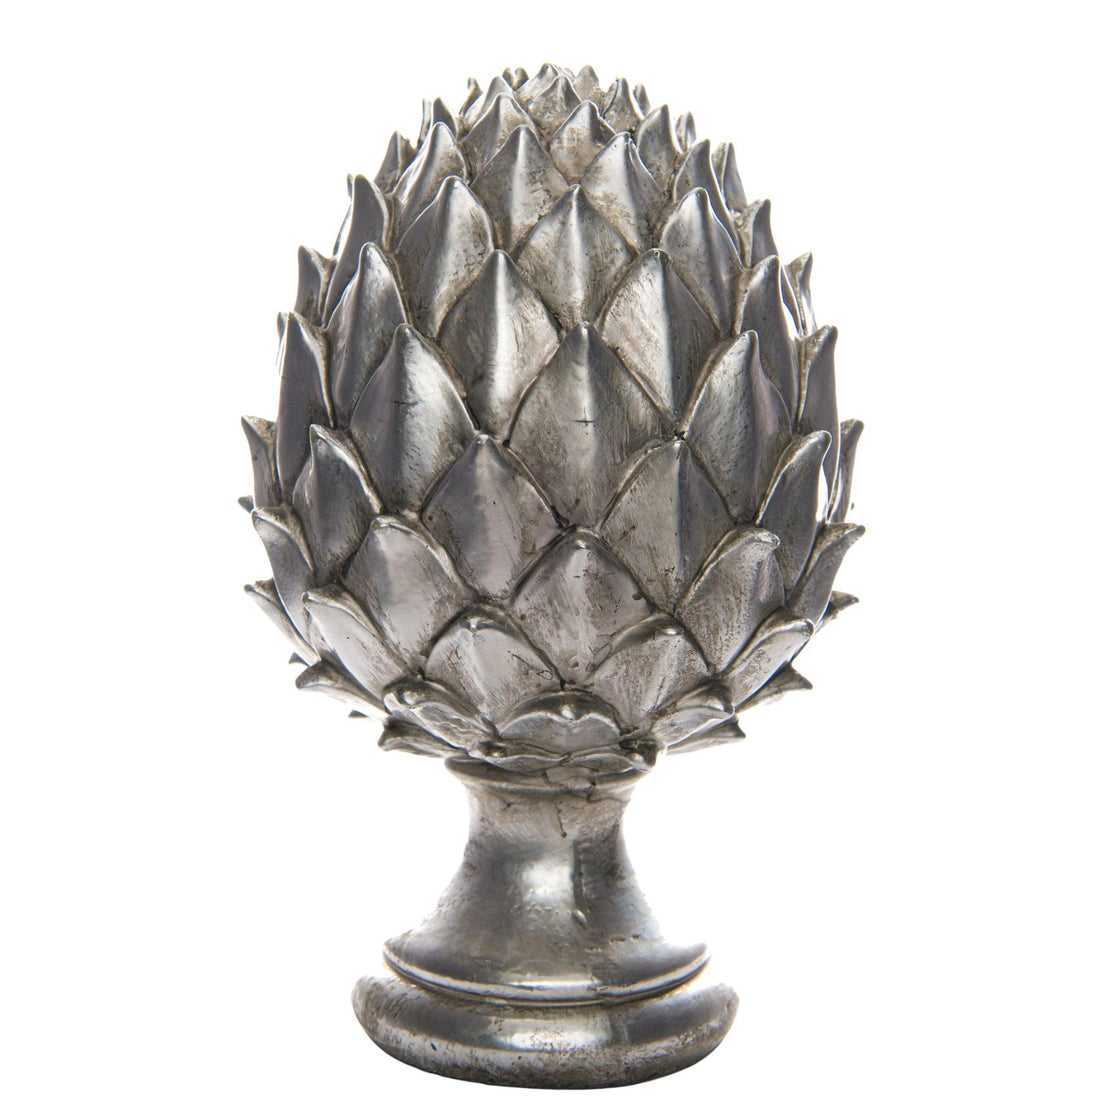 Large Silver Pinecone Finial - £64.95 - Gifts & Accessories > Christmas Decorations > Ornaments 